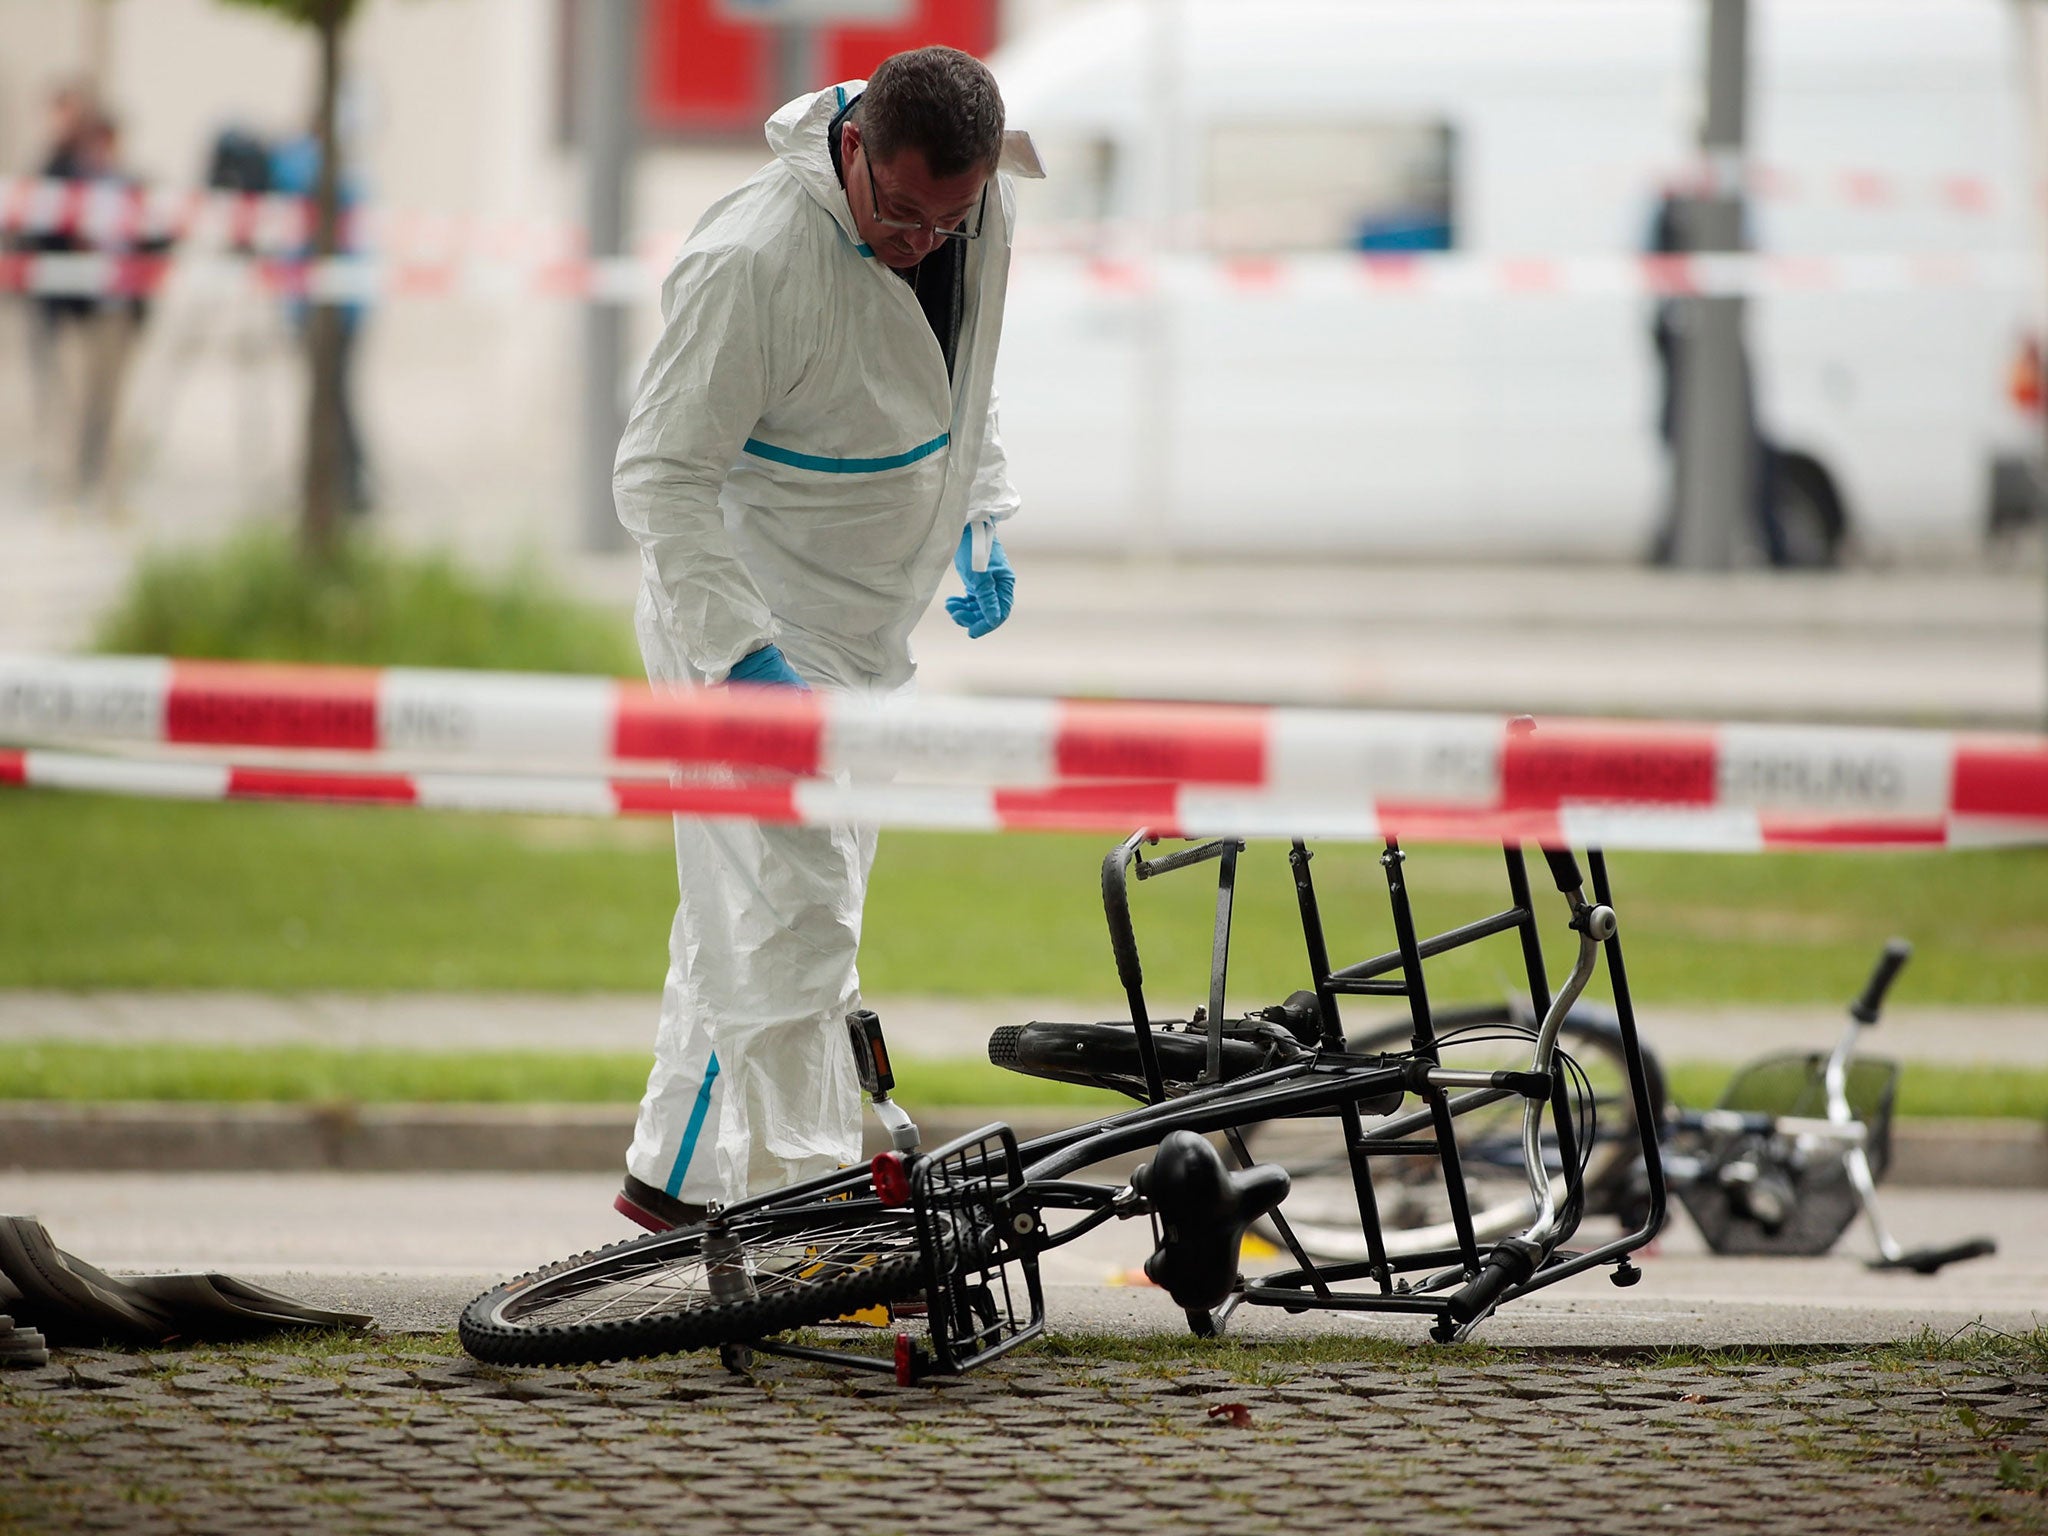 Two bicycles at the scene of a deadly knife attack at a railway station in Grafing, Bavaria, on 10 May 2016